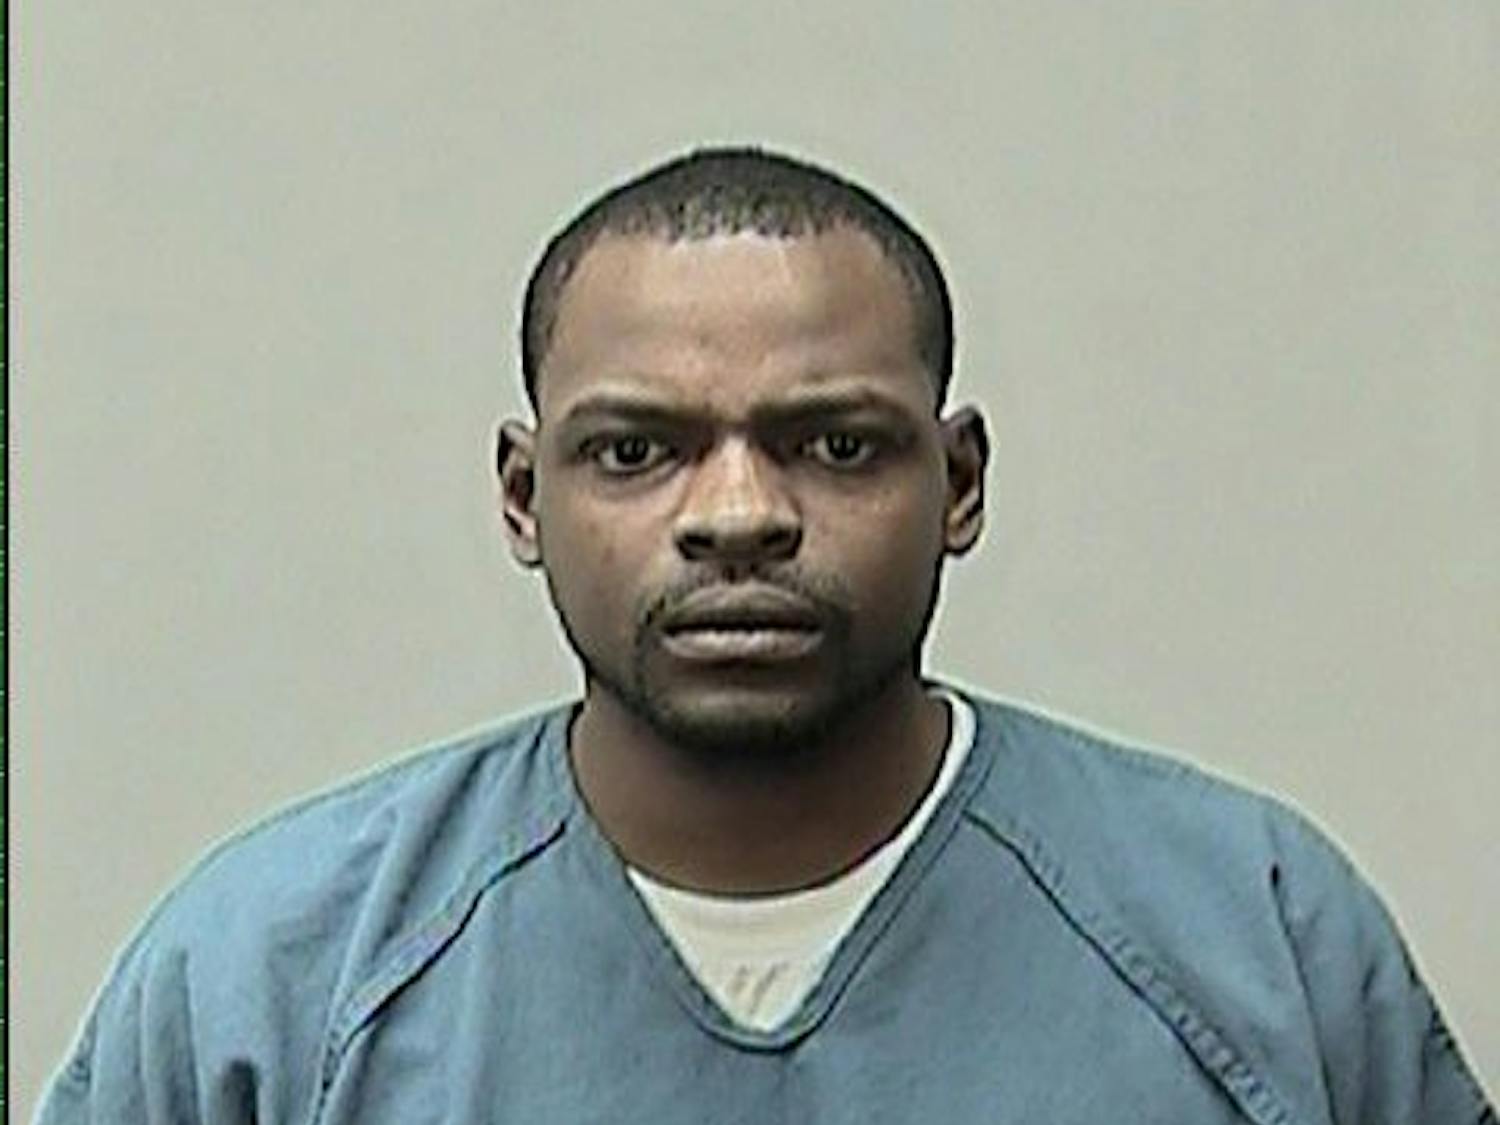 Brandon Crockett, 27, is MPD’s suspect in the September shooting and he remains at large.